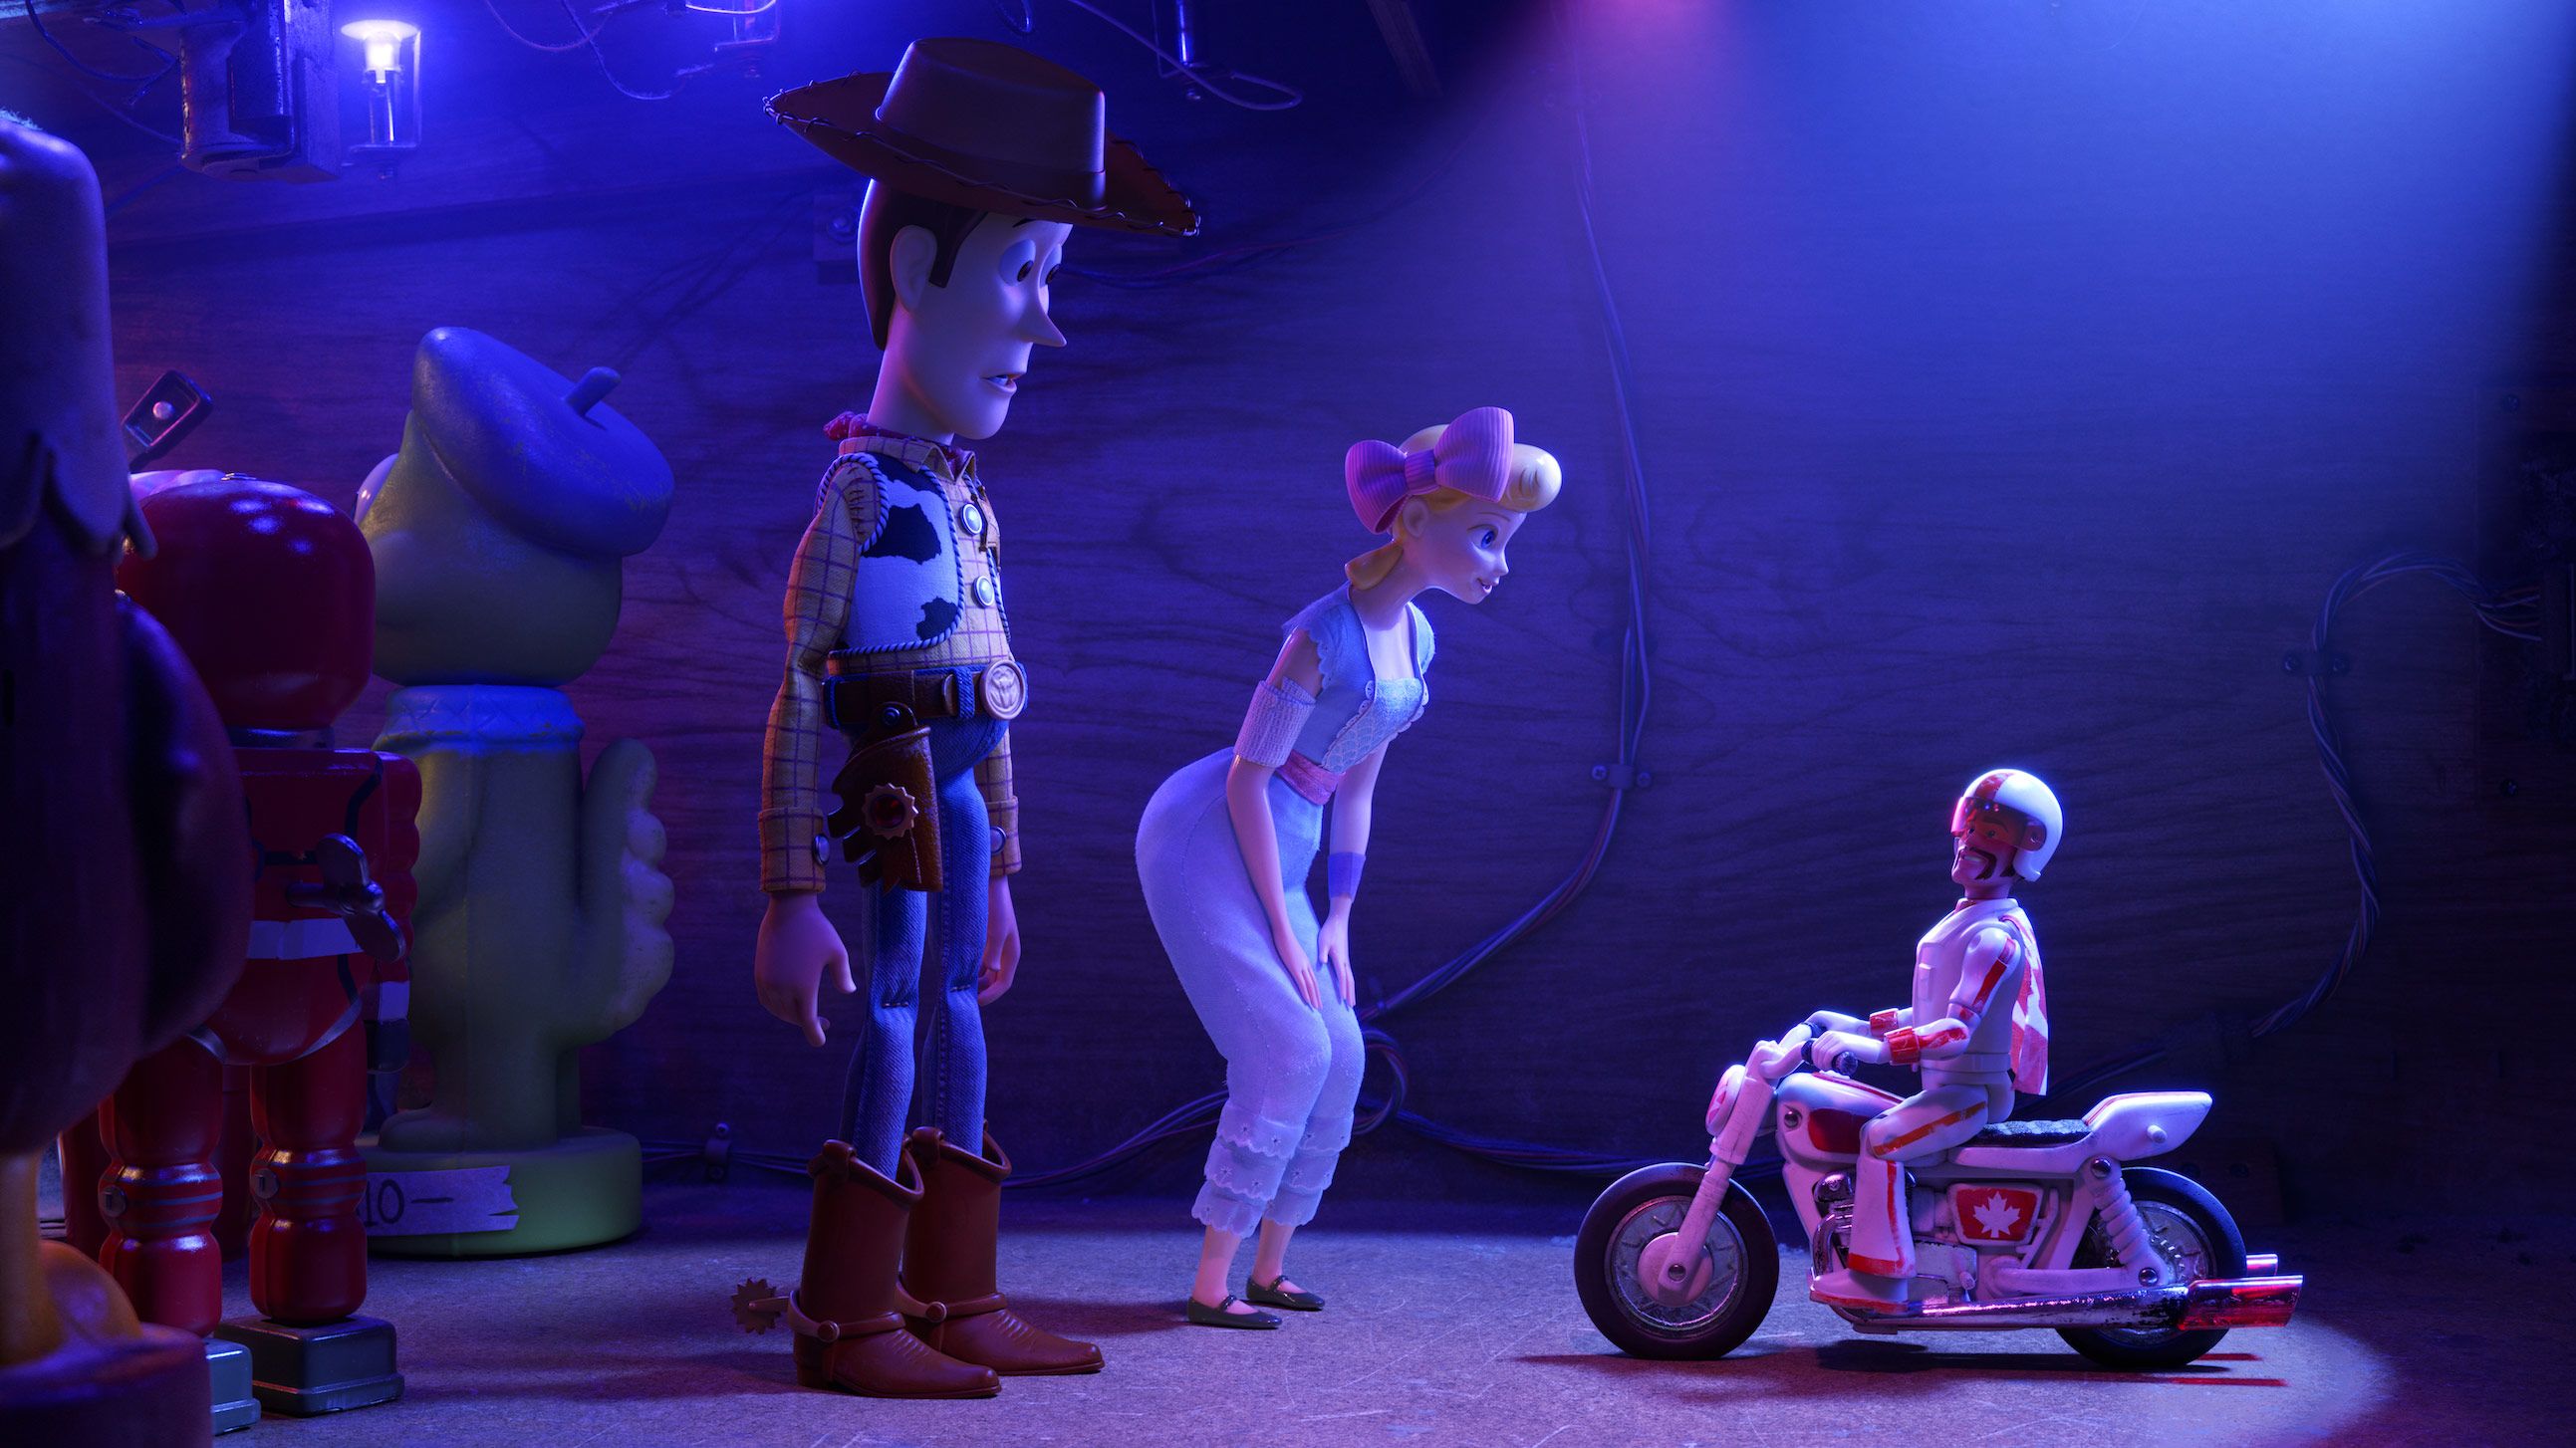 Franchise-Best 'Toy Story 4' Puts A Forky In It